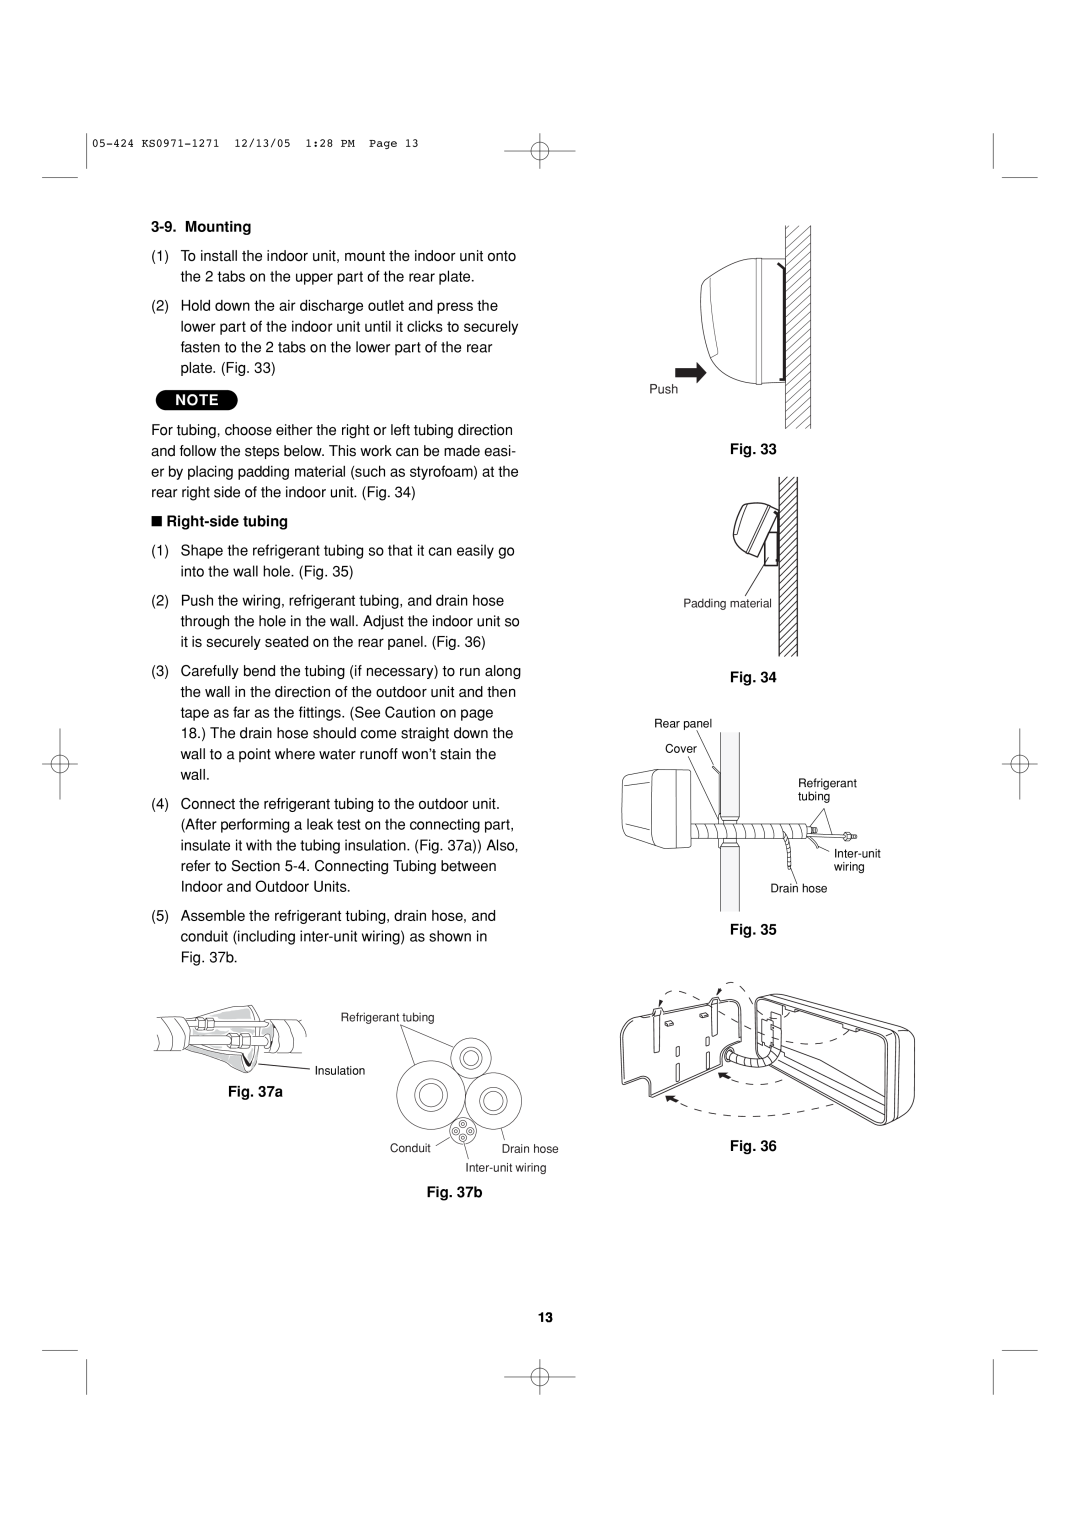 Sanyo Cool/Dry installation instructions Mounting, Right-sidetubing, Fig. Fig, Push 